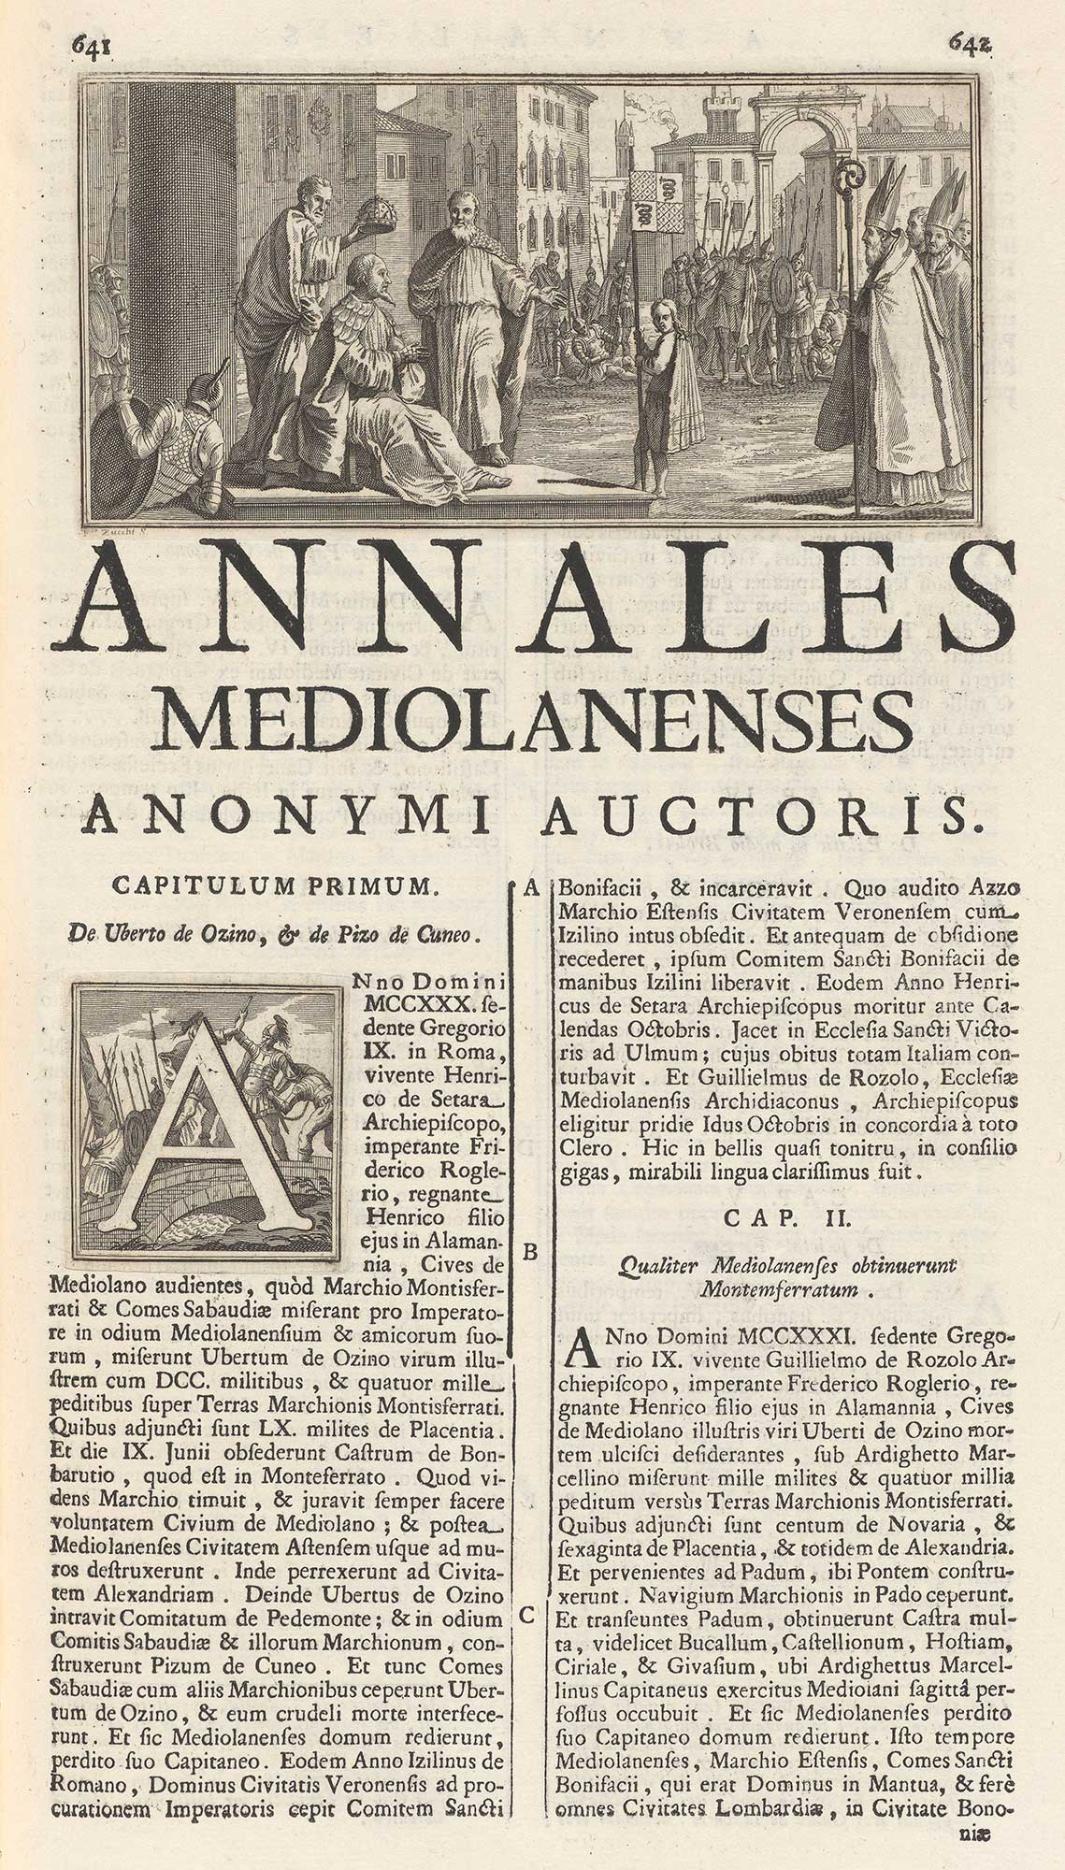 Frontispiece of a book with two columns of text and and image at the top of the page.